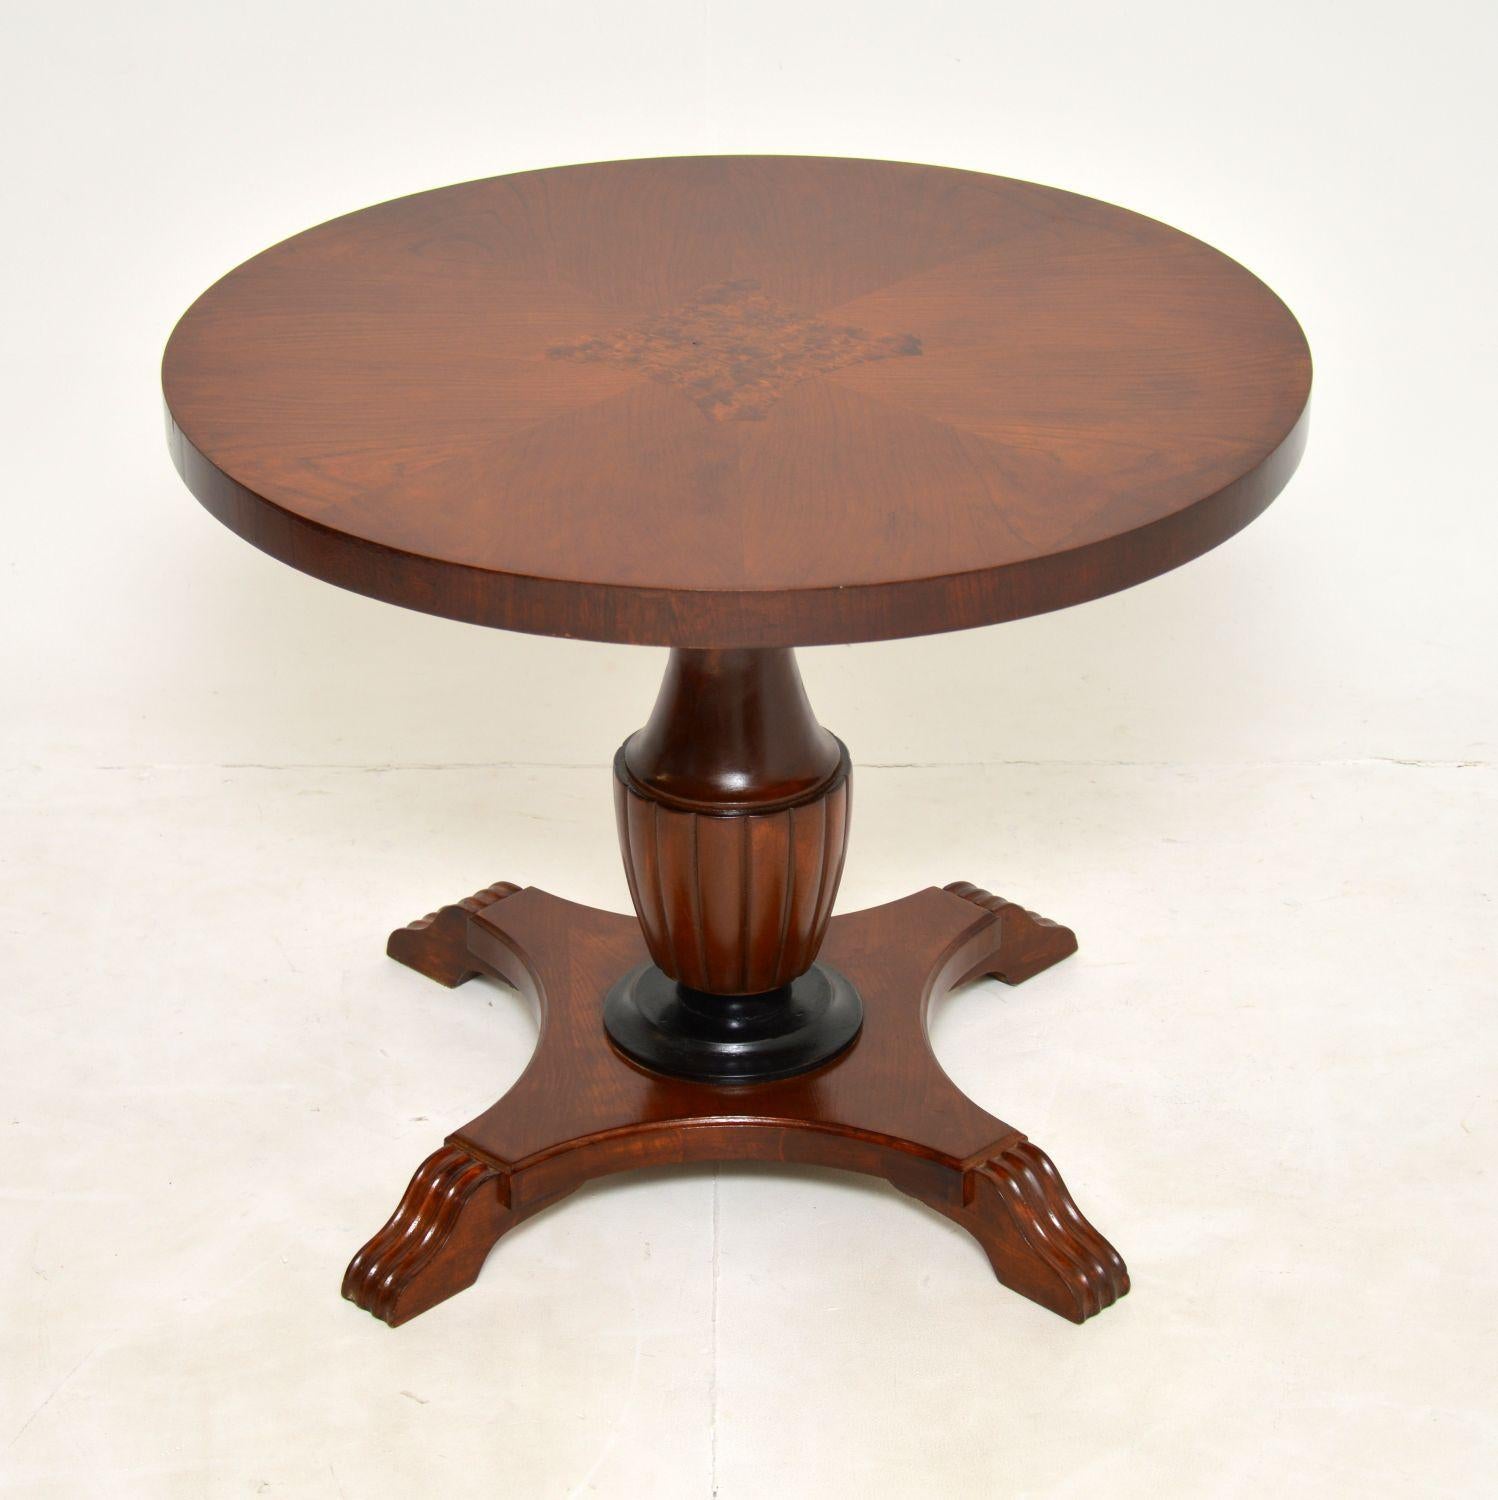 A stunning antique Swedish walnut low table in the Biedermeier style. This was made in Sweden, it dates from around the 1880-1900 period.

It is of excellent quality and is a useful size to be used as either a coffee table or occasional side